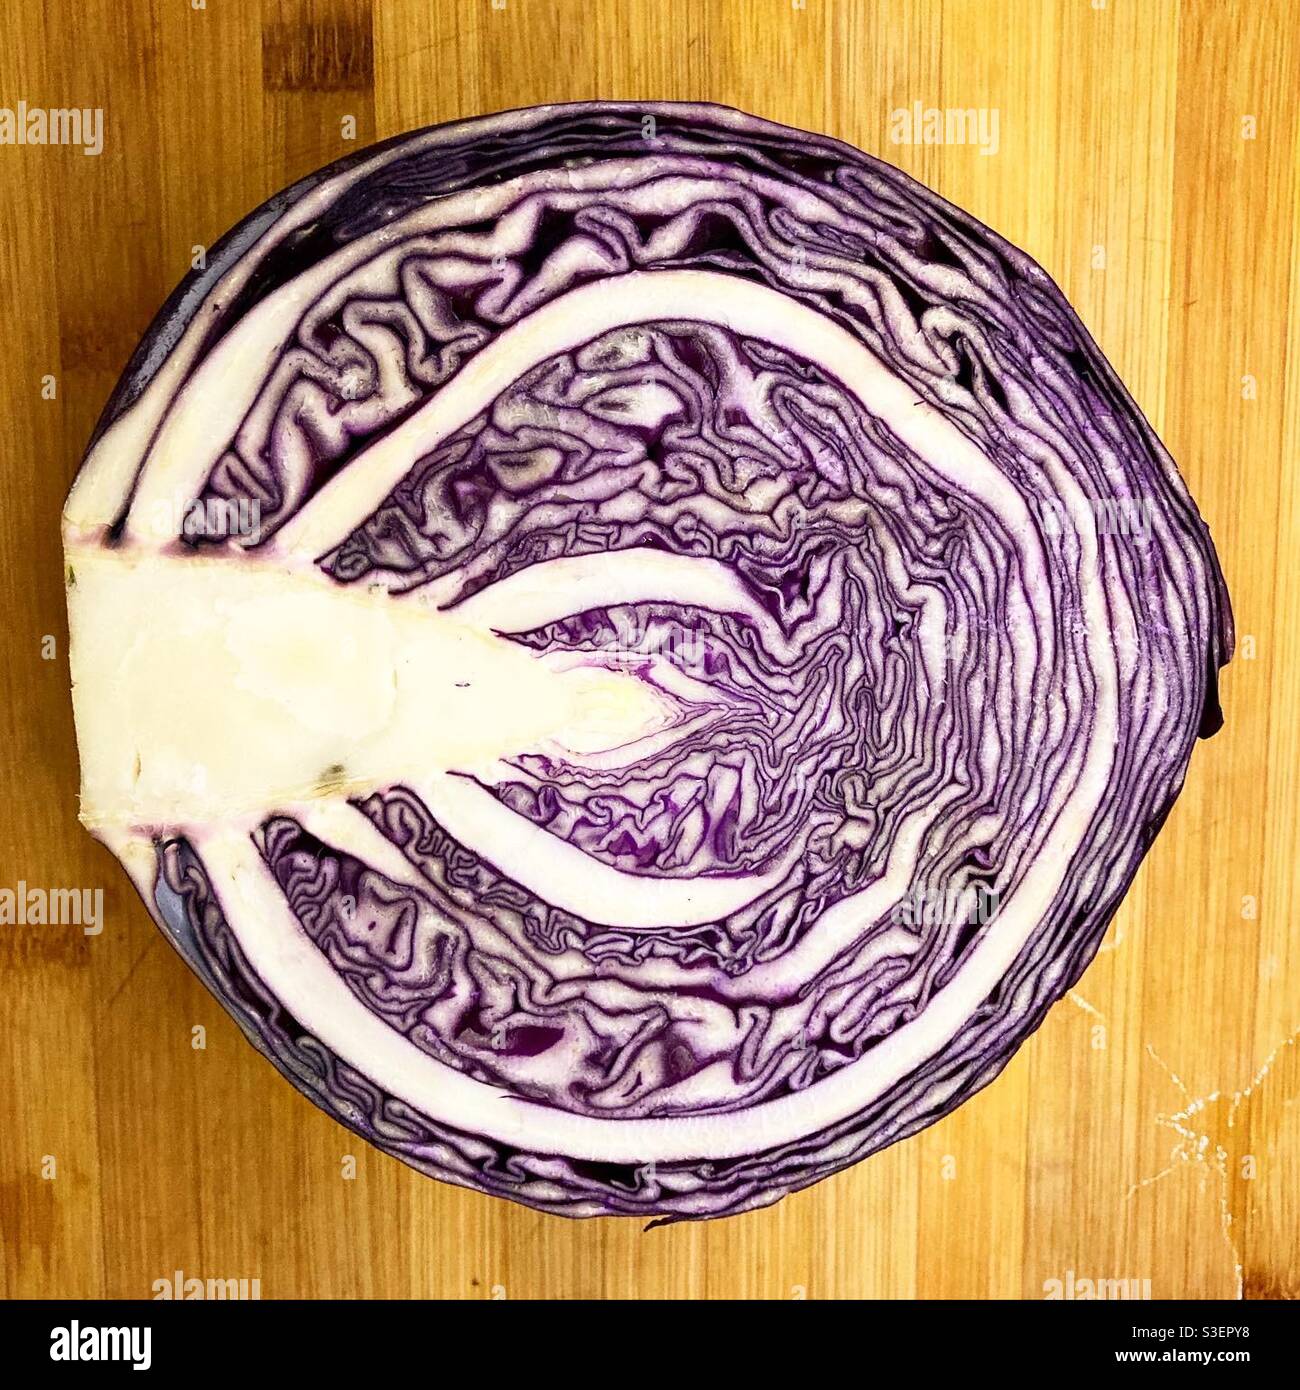 A half of red cabbage Stock Photo